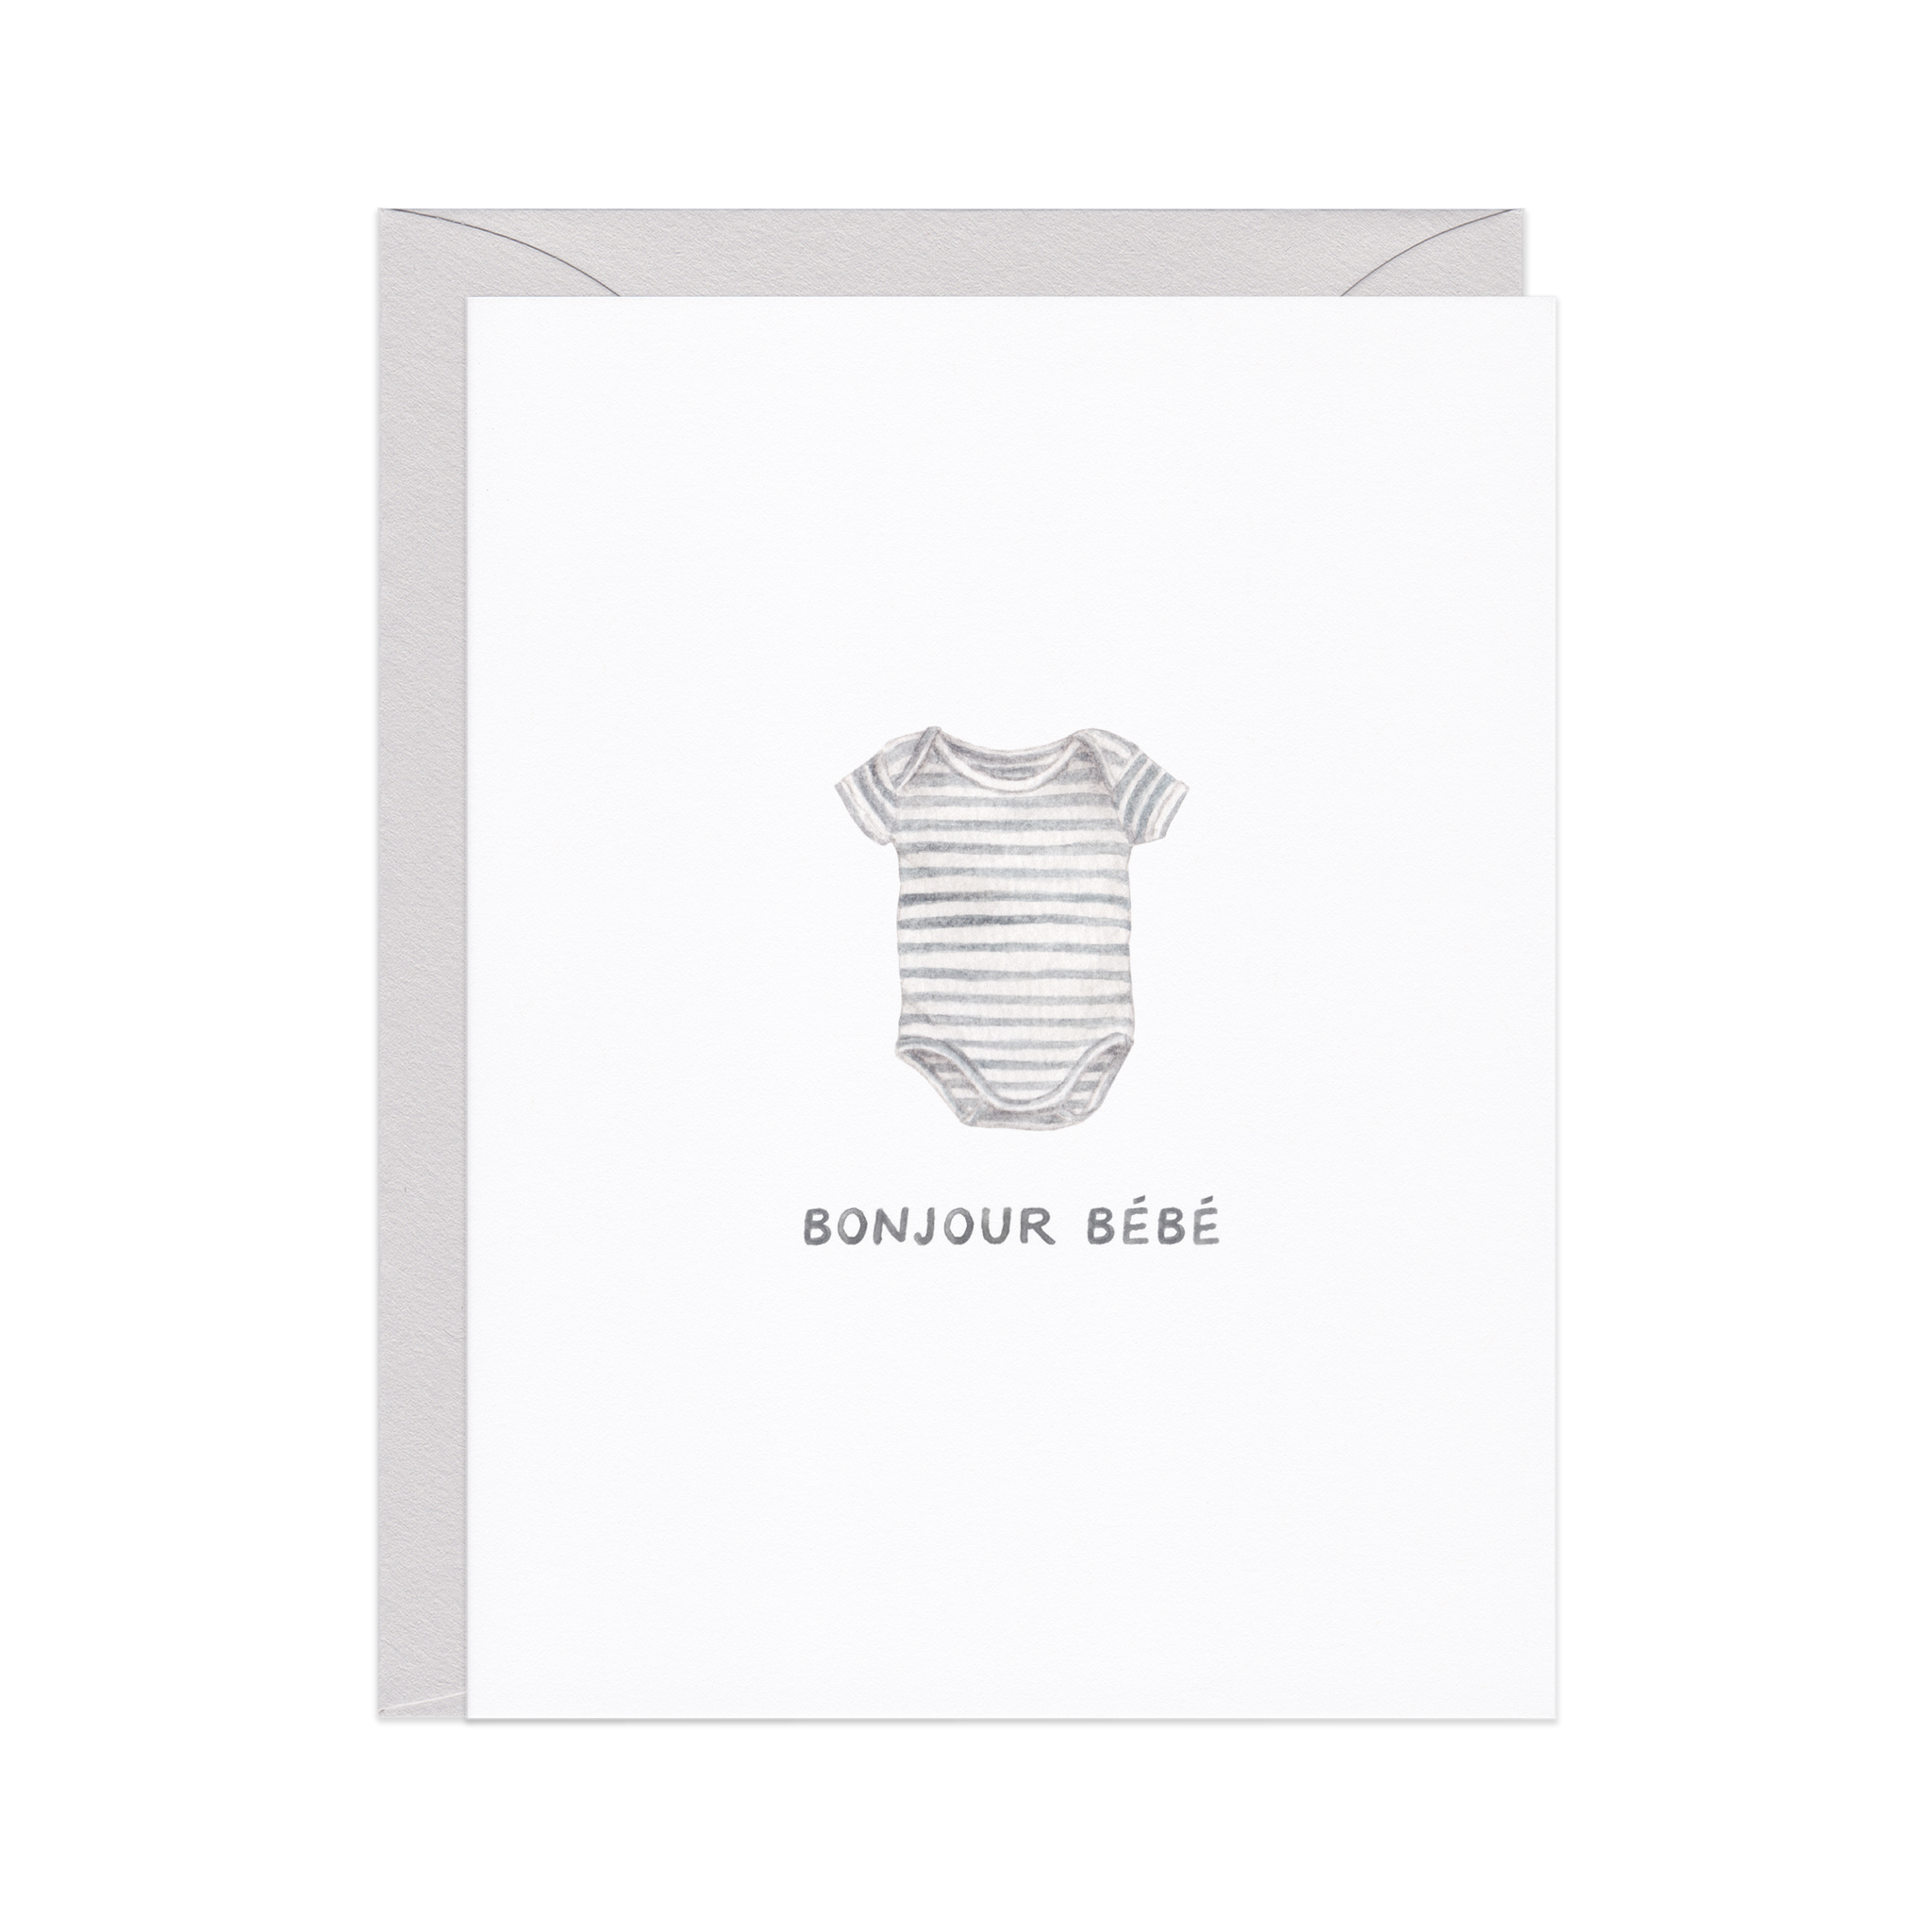 Bonjour Bébé — French New Baby Card